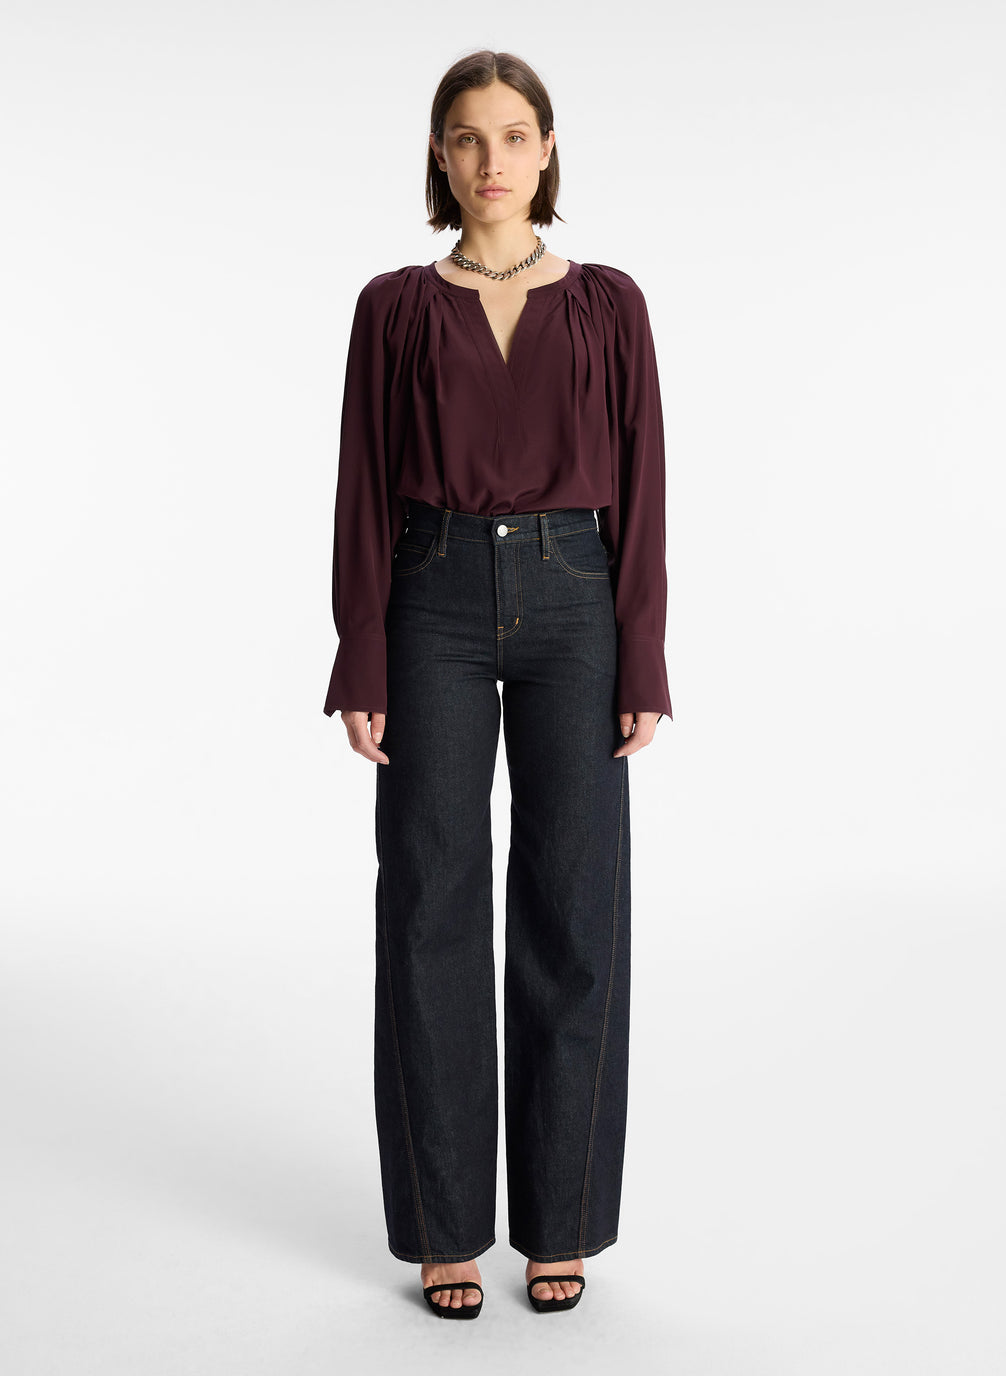 front view of woman wearing burgundy v neck long sleeve silk top and dark wash denim jeans